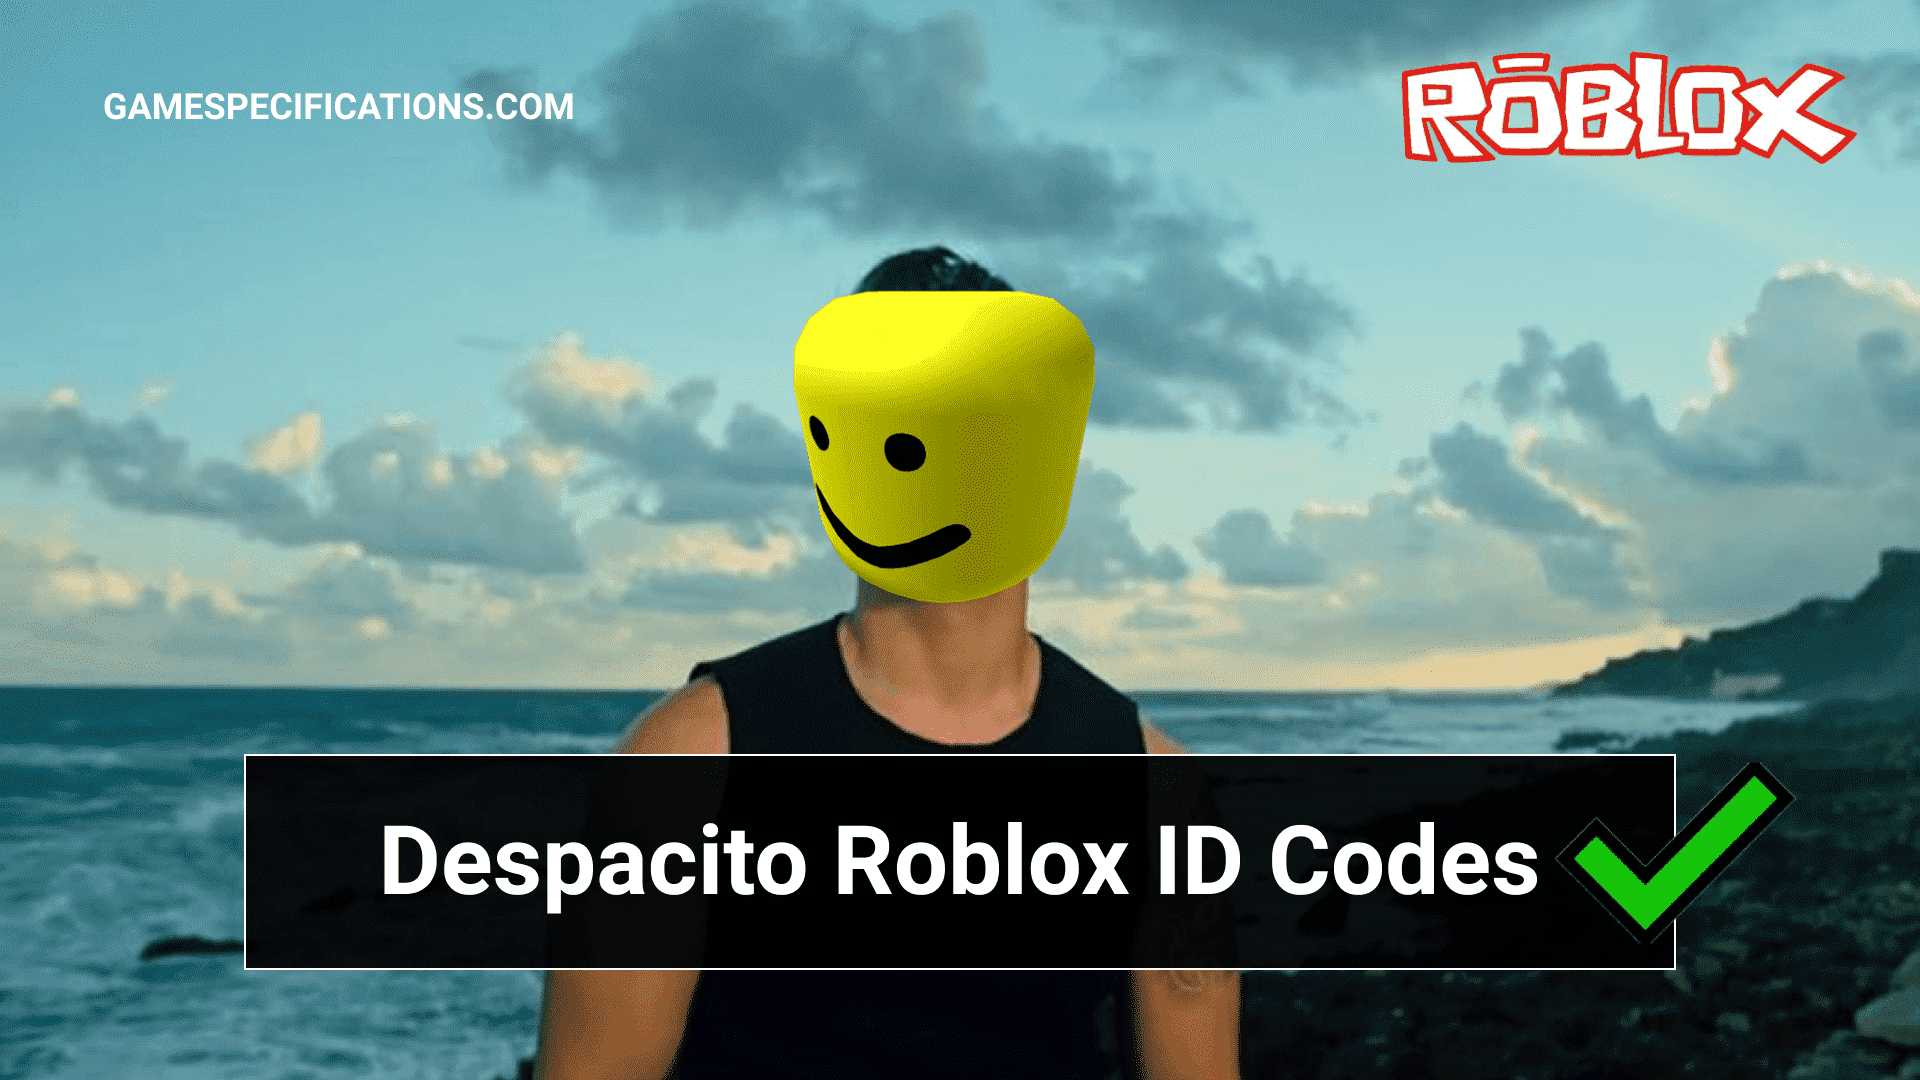 Despacito Roblox Id Codes To Play Awesome Spanish Song 2021 Game Specifications - roblox justin bieber id